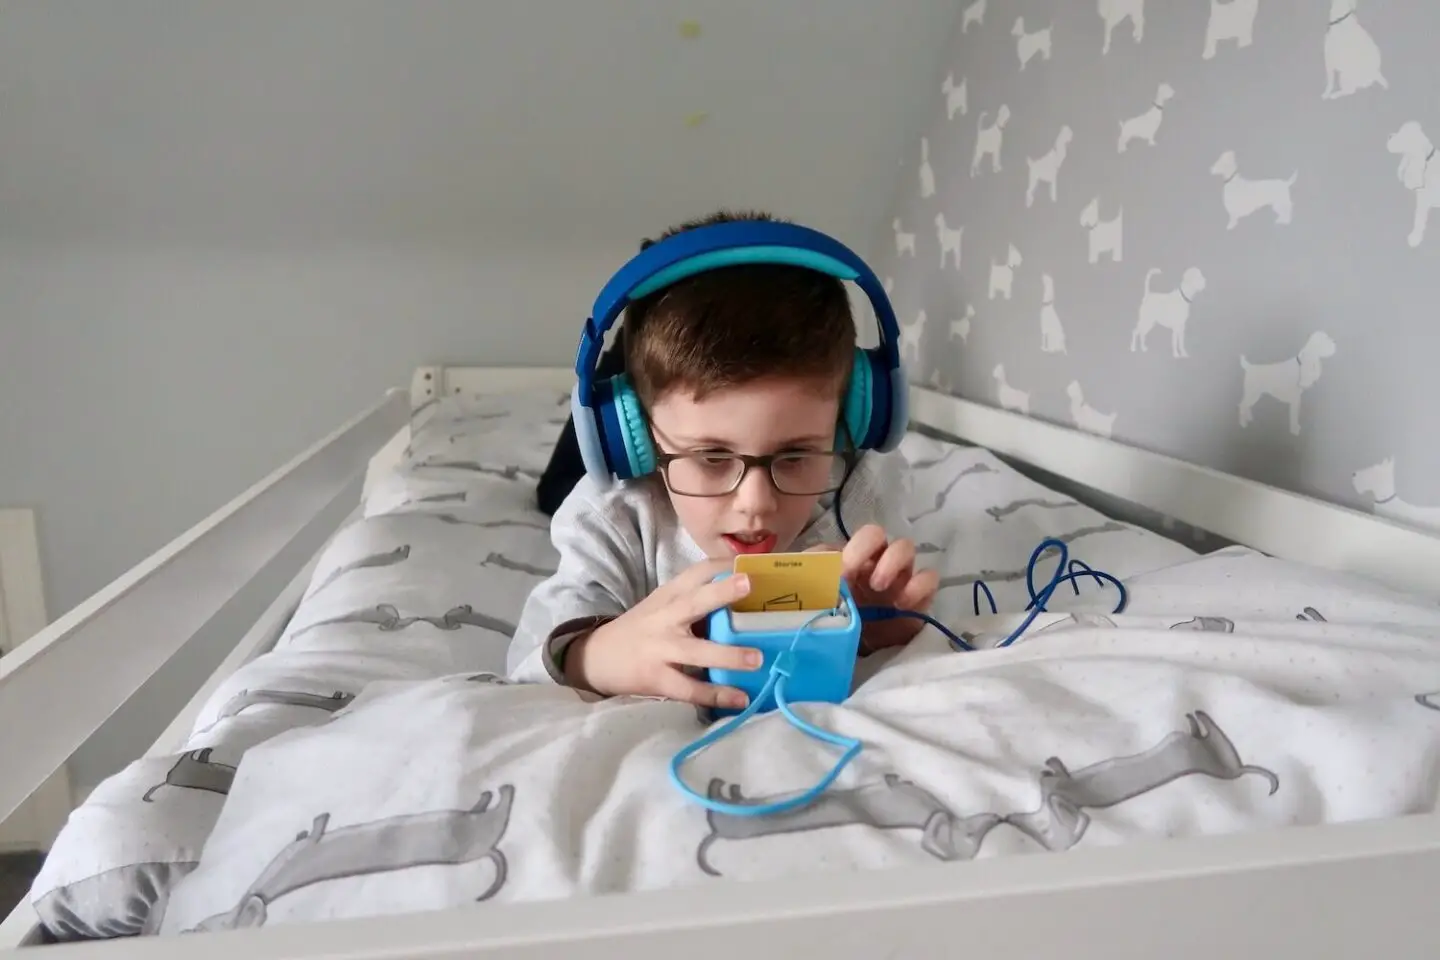 A boy lying on a bed looking down at a Yoto mini player. He is wearing blue headphones and his hand is reaching to touch the yellow card in the top